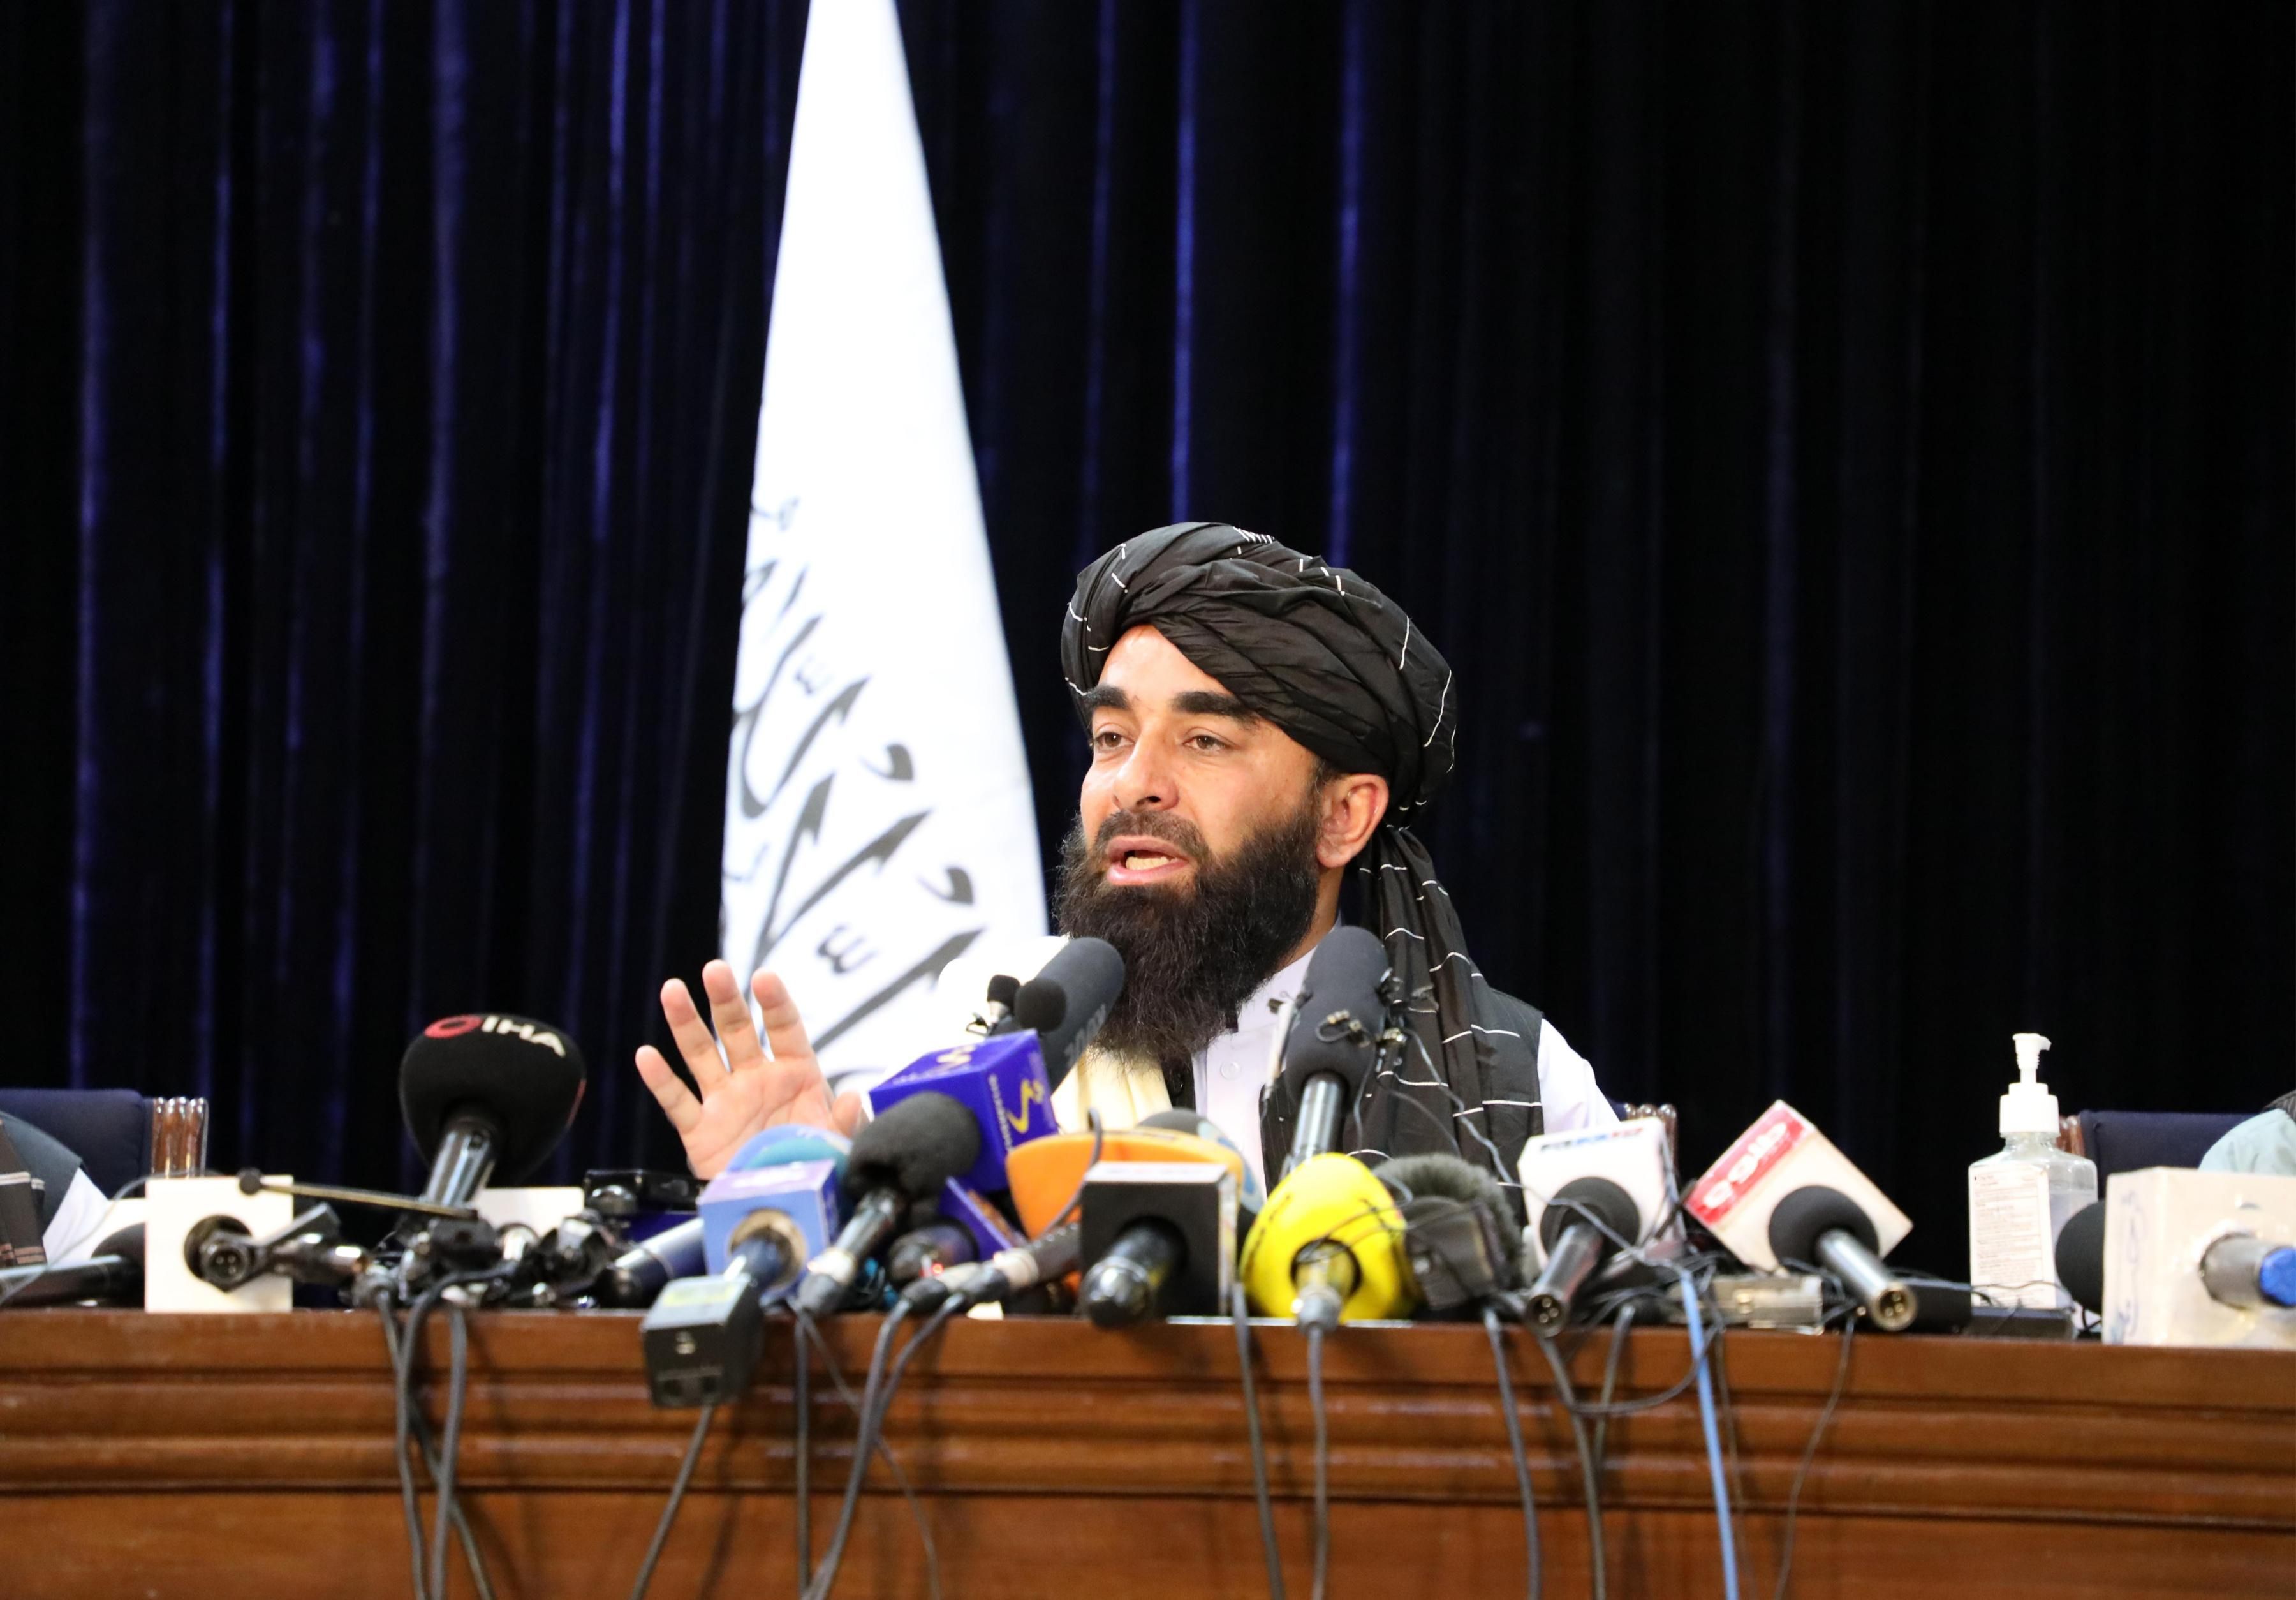 Taliban spokesperson speaks during a press conference